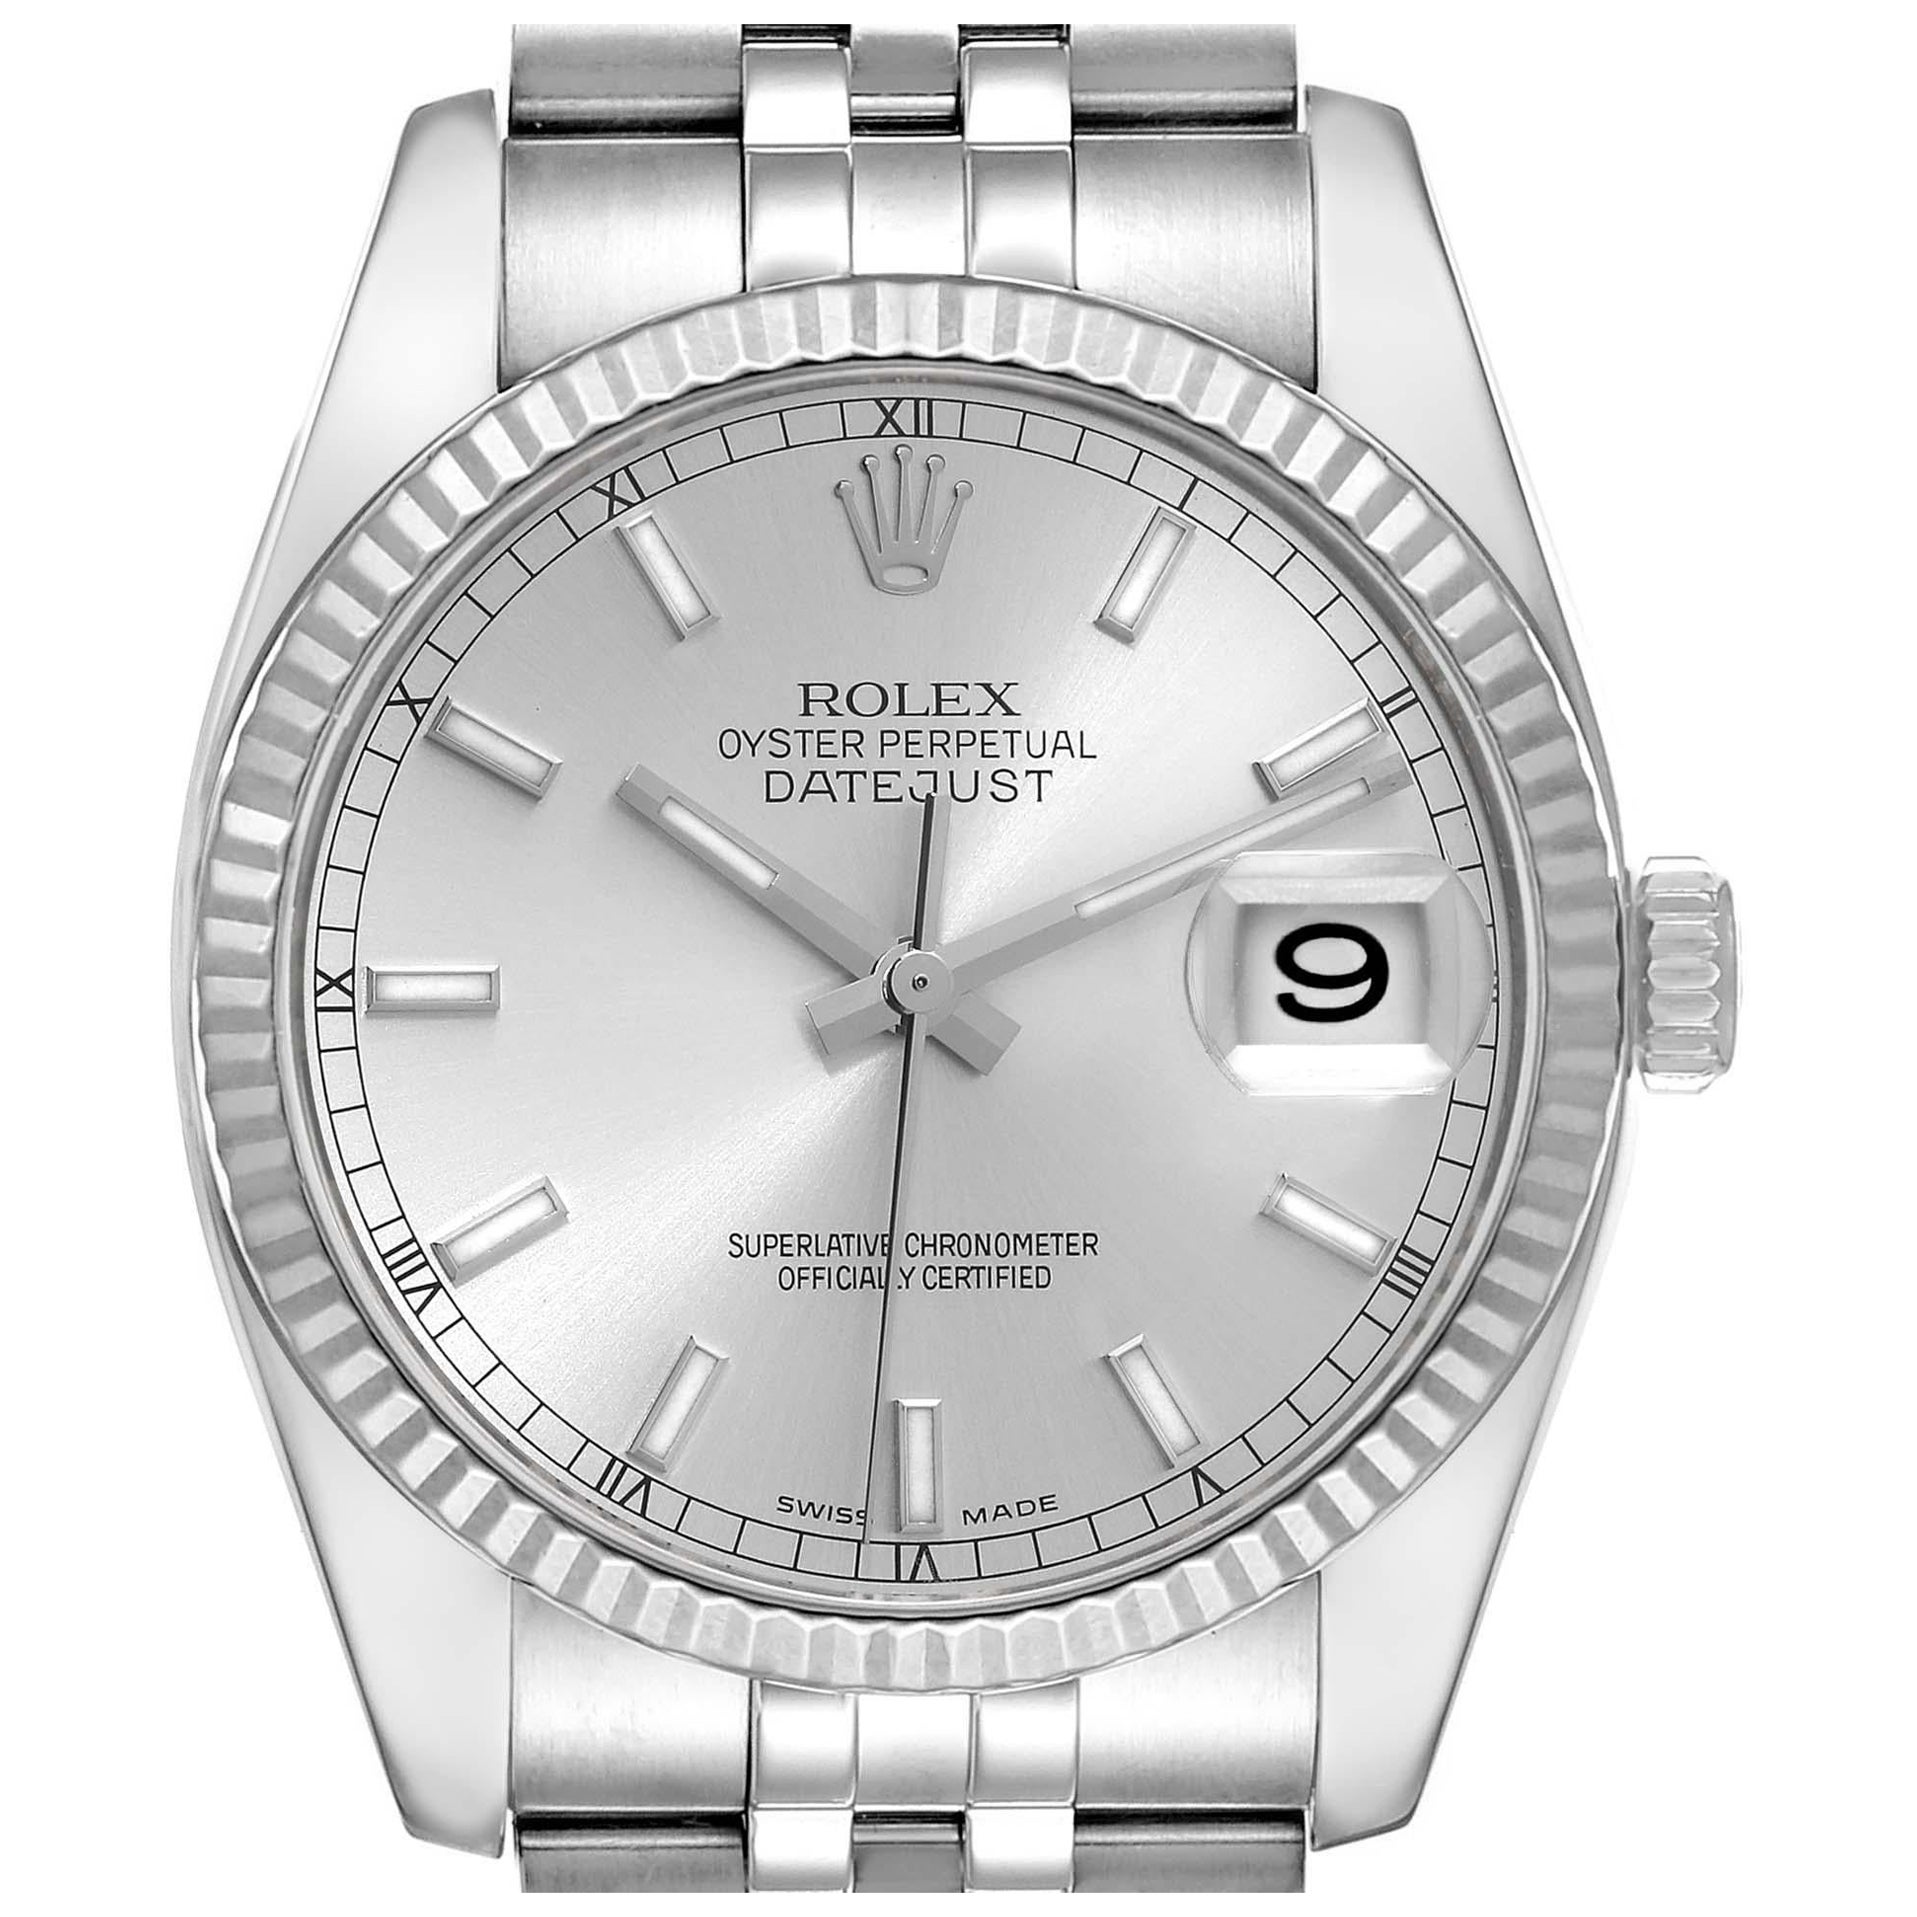 Rolex Datejust Steel White Gold Silver Dial Mens Watch 116234 Box Papers en vente